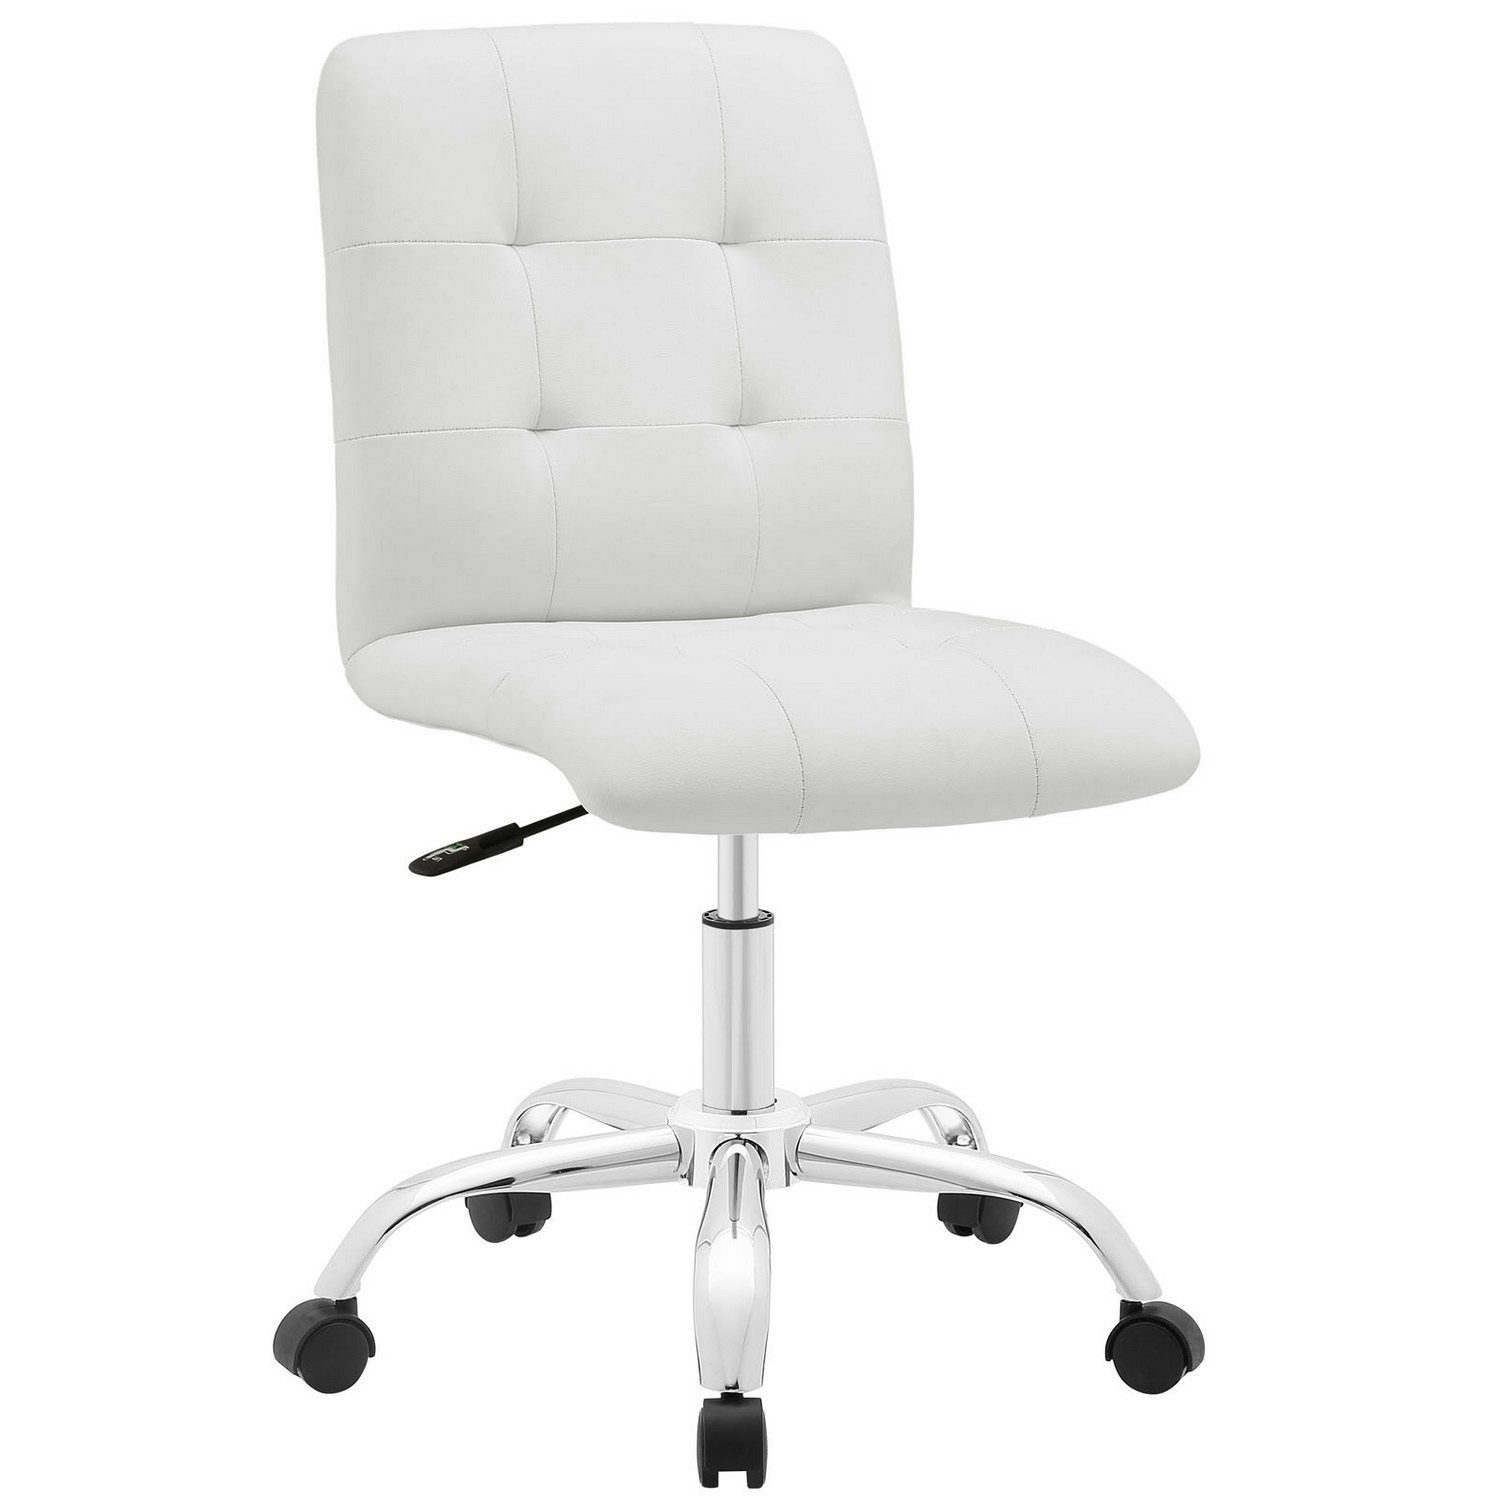 Modway Prim Armless Mid Back Office Chair - White